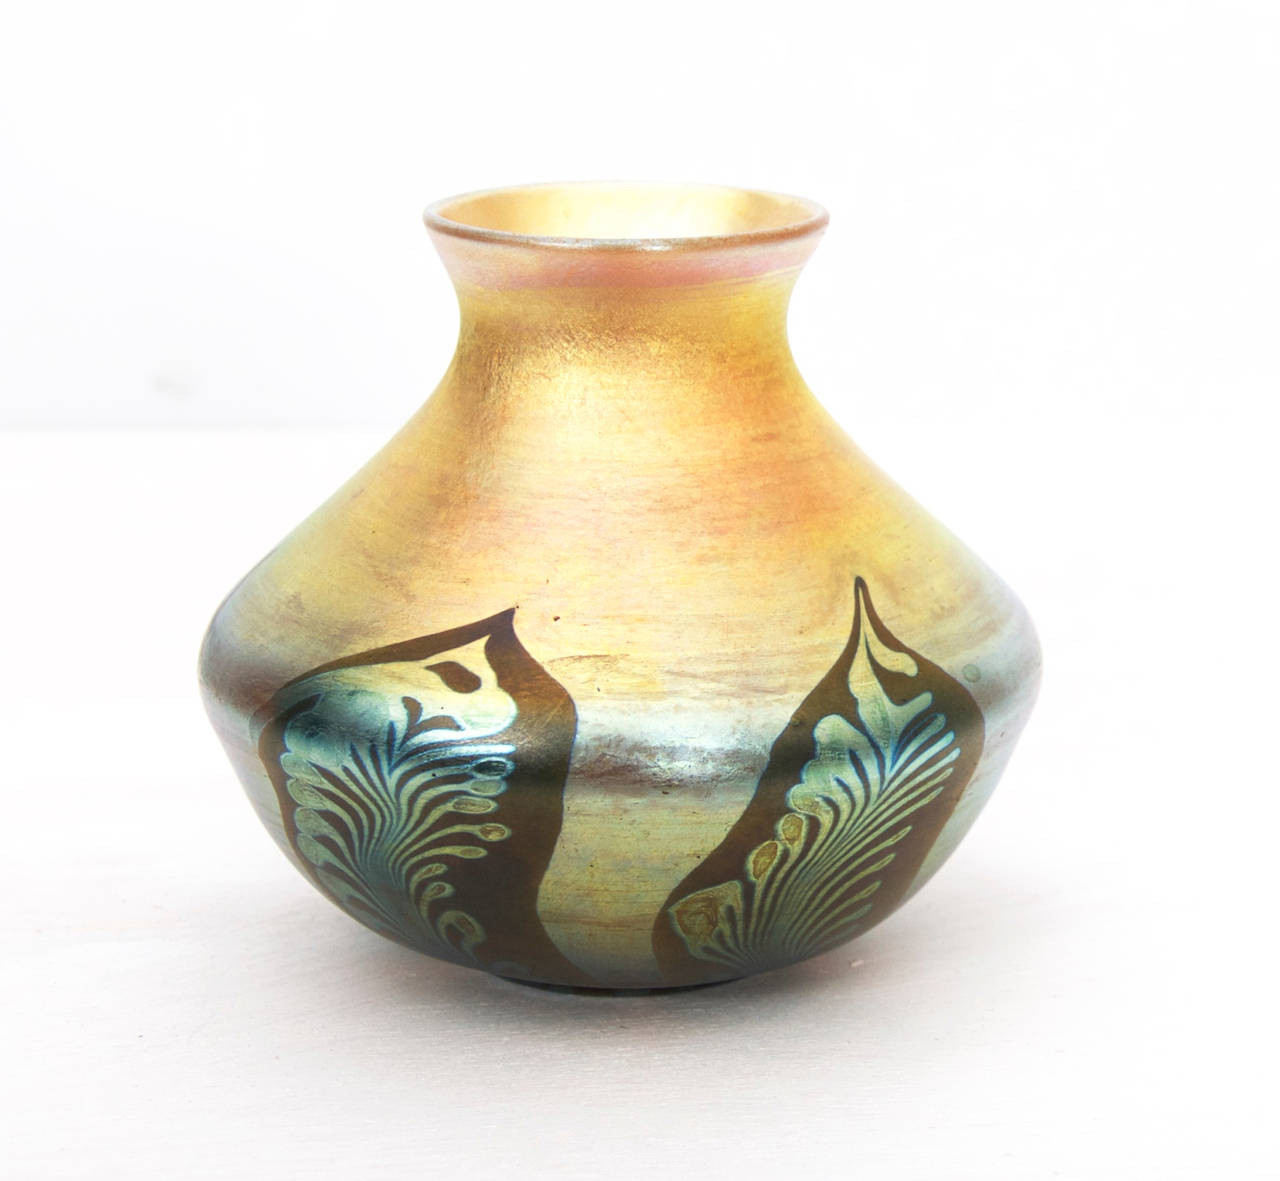 23 Lovable Tiffany Vases for Sale 2023 free download tiffany vases for sale of tiffany favrile vase lct t intended for art nouveau louis comfort tiffany favrile glass vase for sale